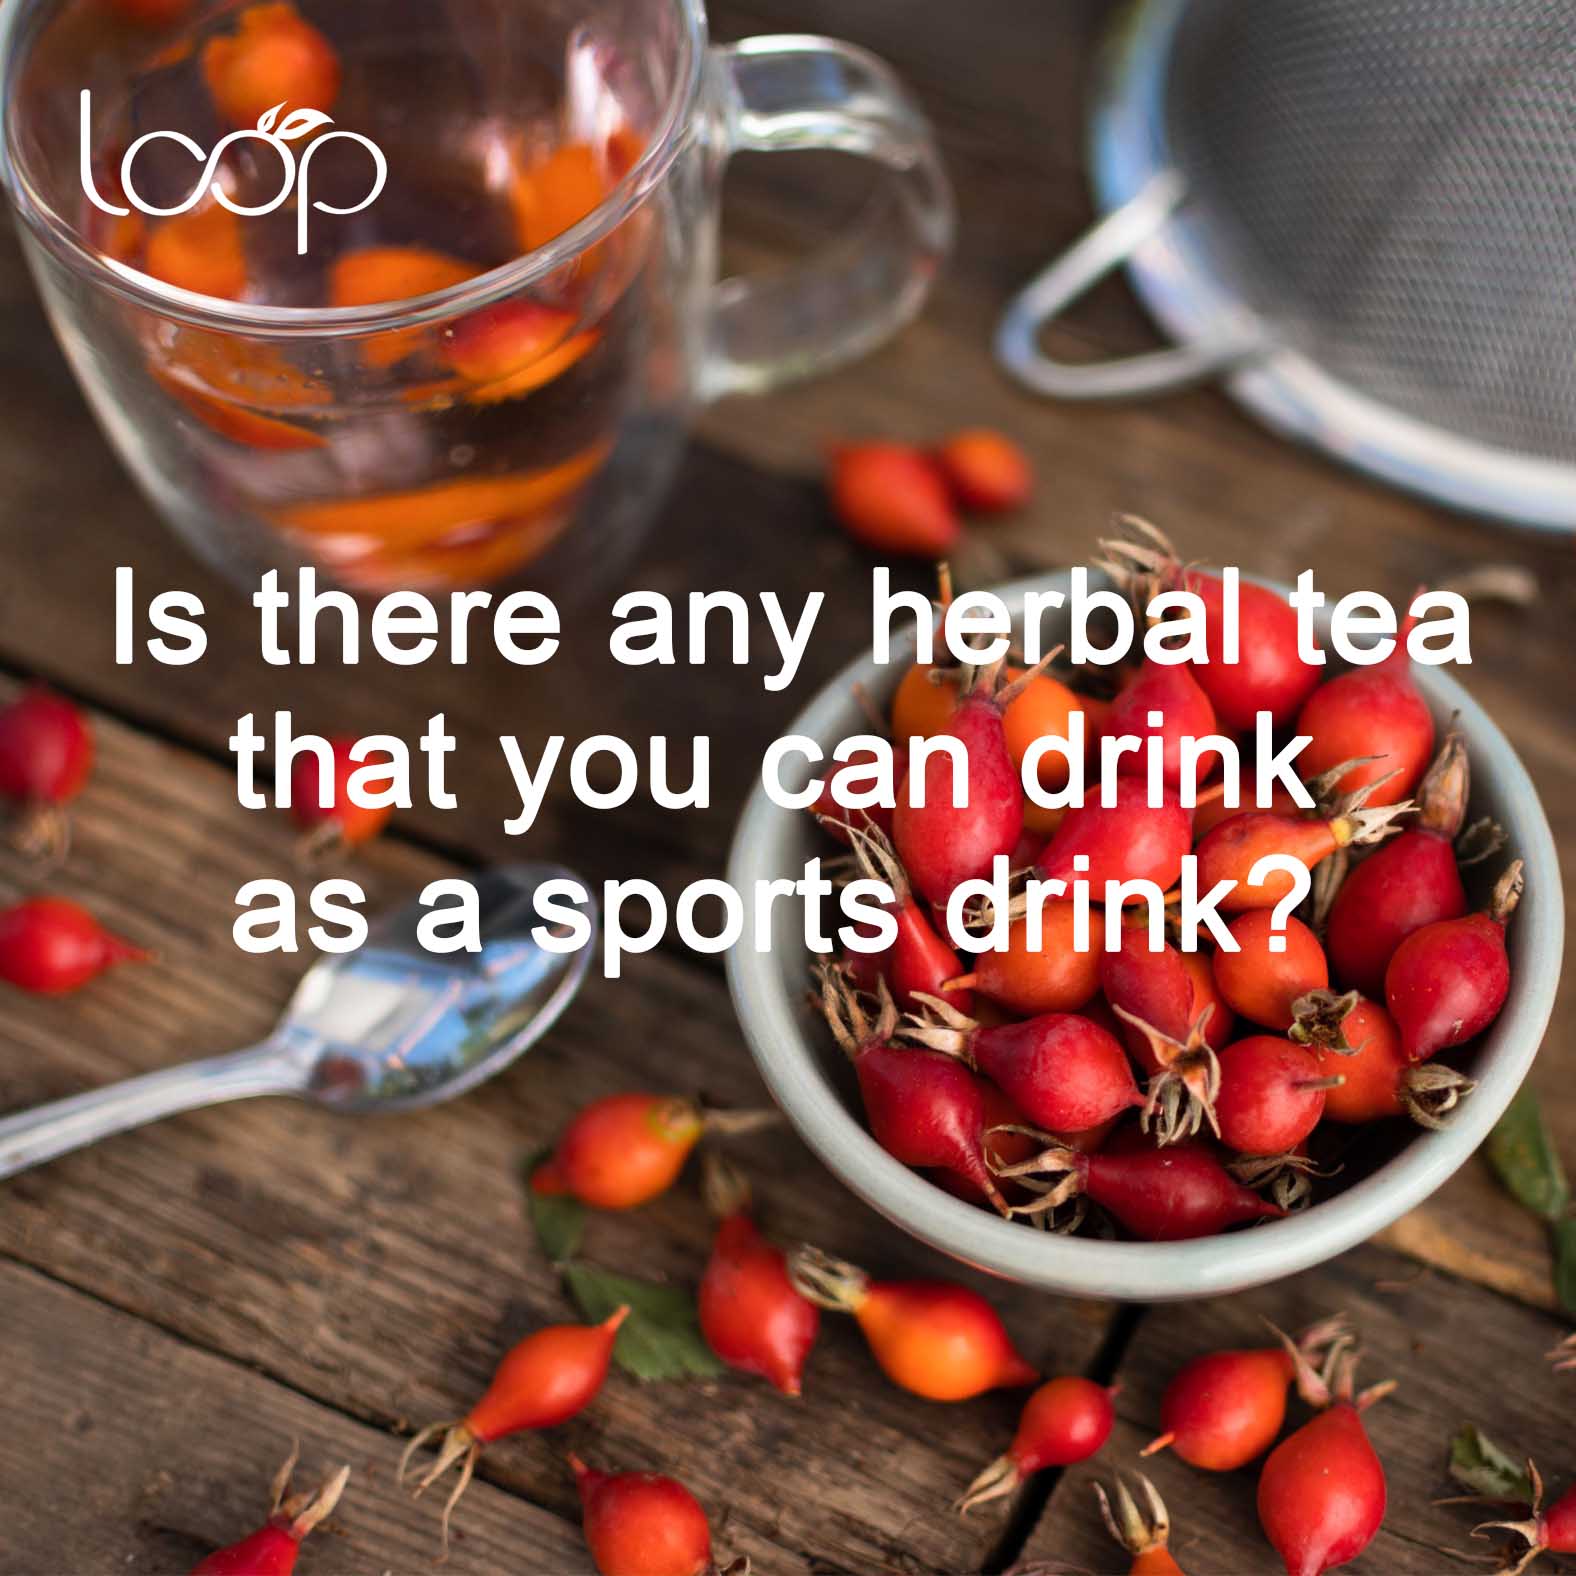 Is there any herbal tea that you can drink as a sports drink?